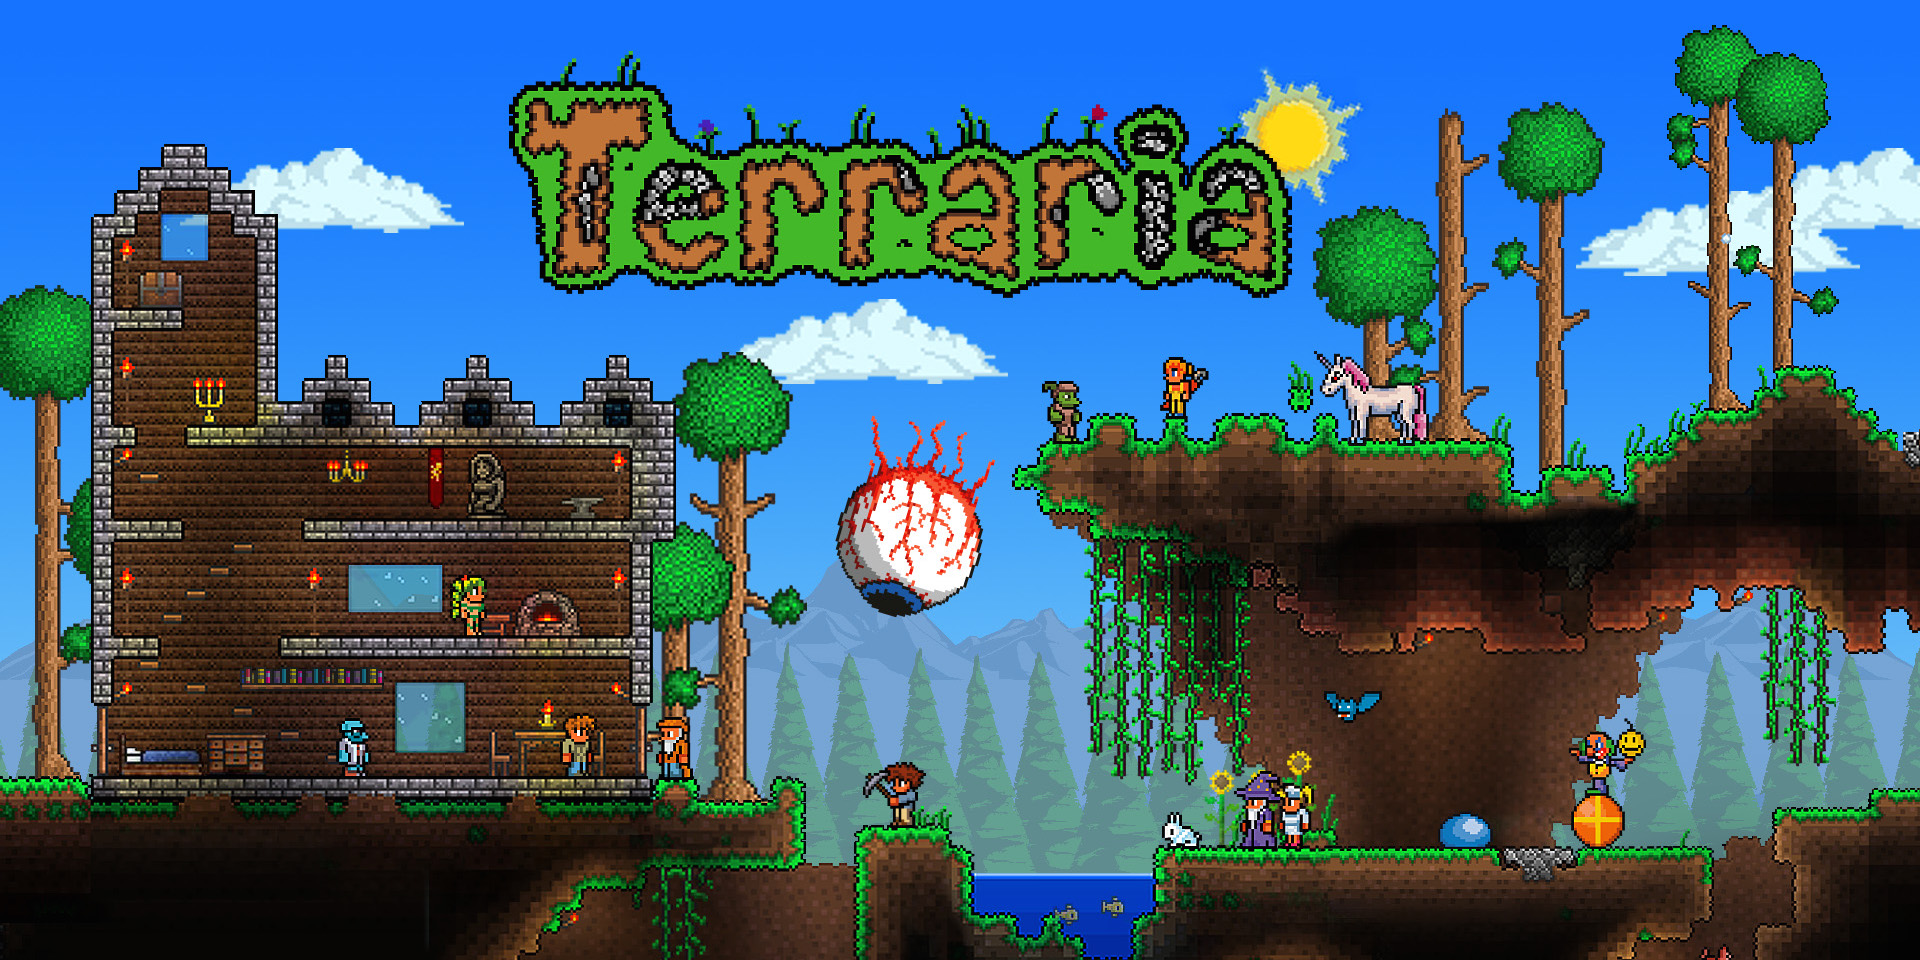 Today’s Best Game Deals: Terraria Switch $18, Mega Man 11 $14, more.